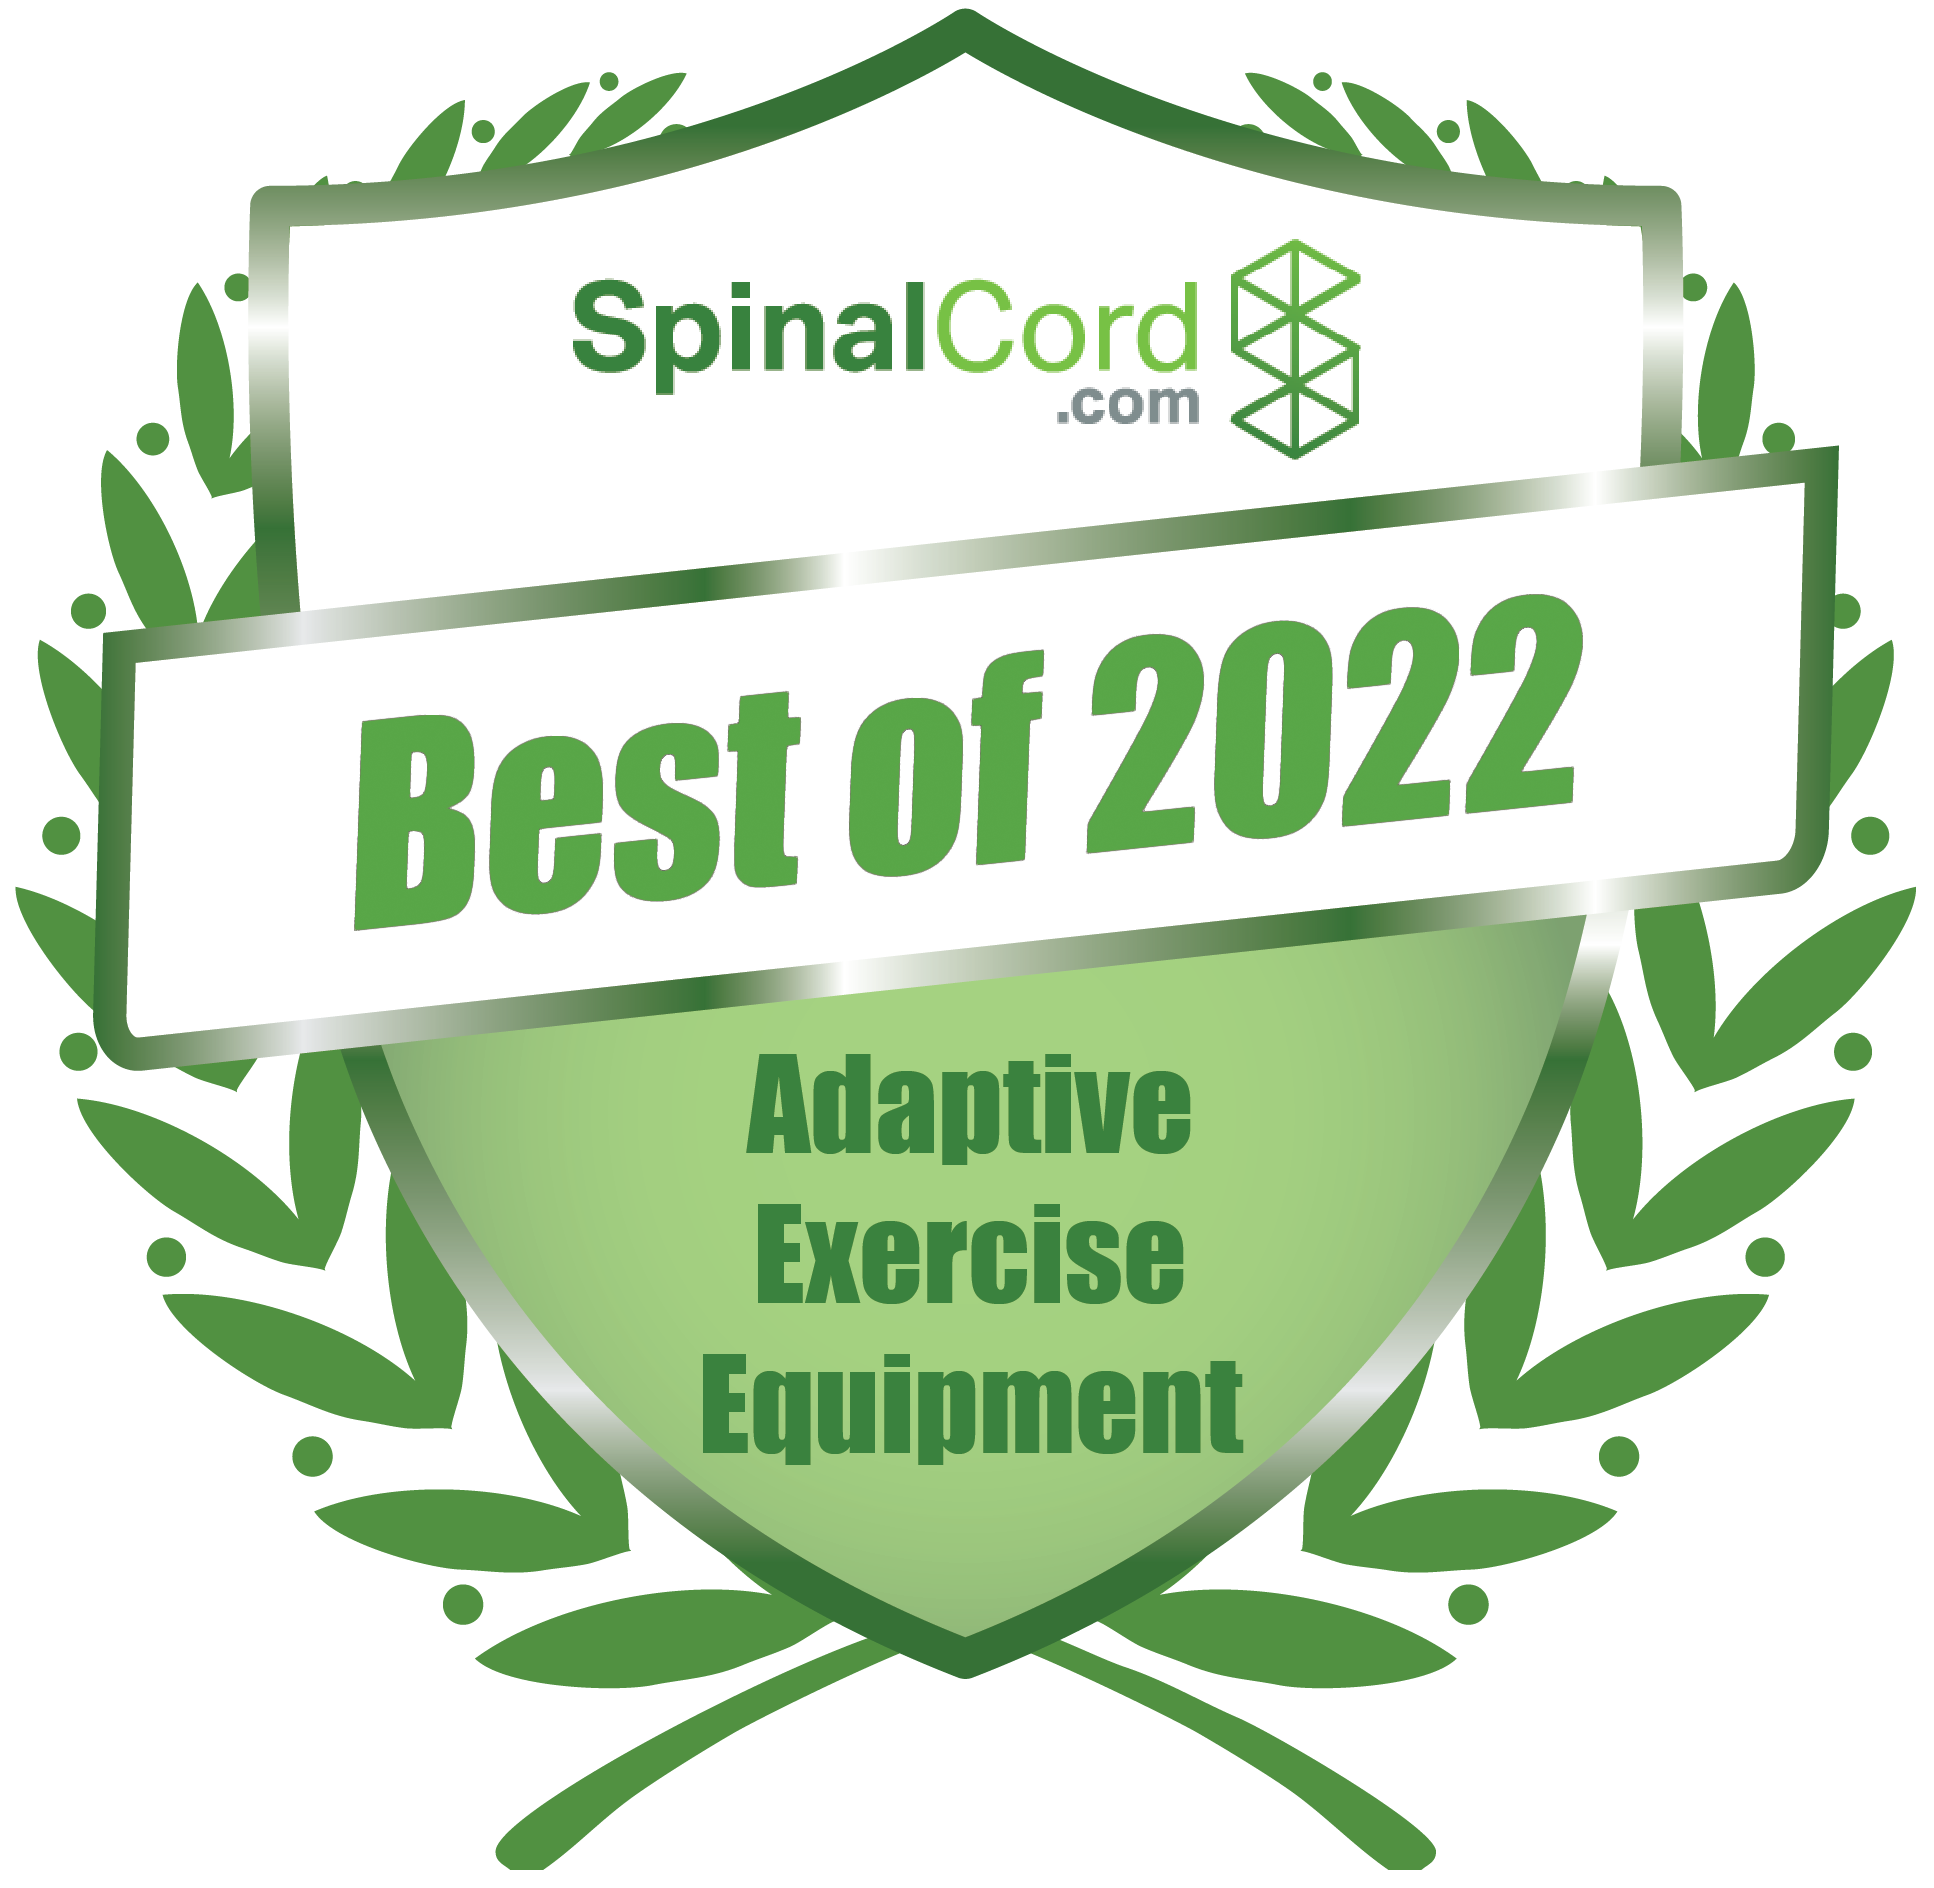 Spinalcord.com Best of Awards Adaptive Exercise Equipment